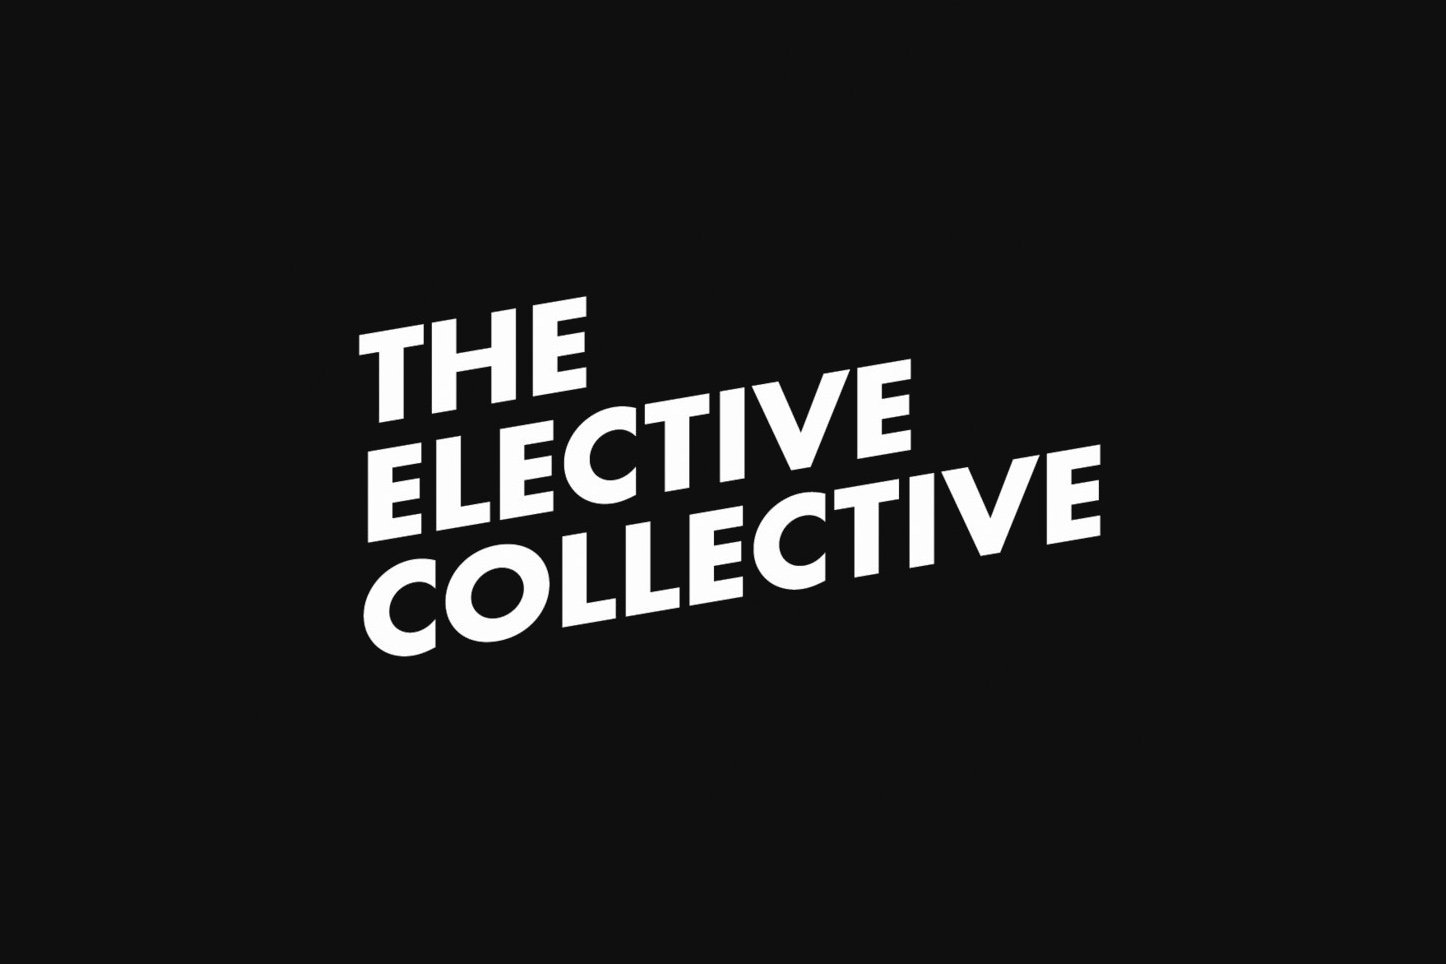 The Elective Collective